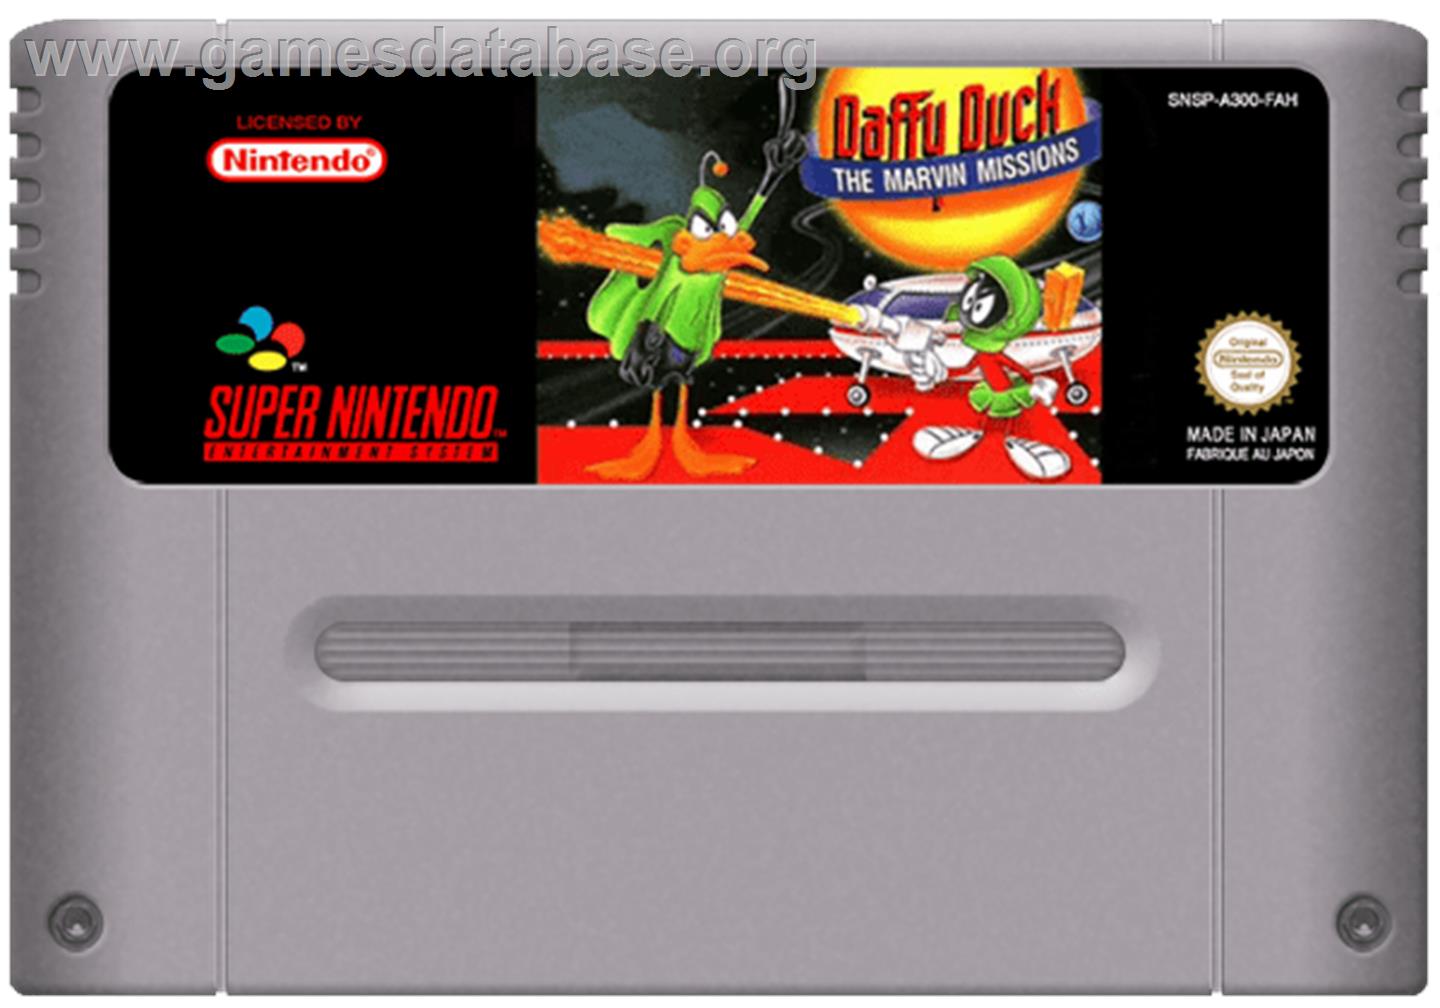 Daffy Duck: The Marvin Missions - Nintendo SNES - Artwork - Cartridge